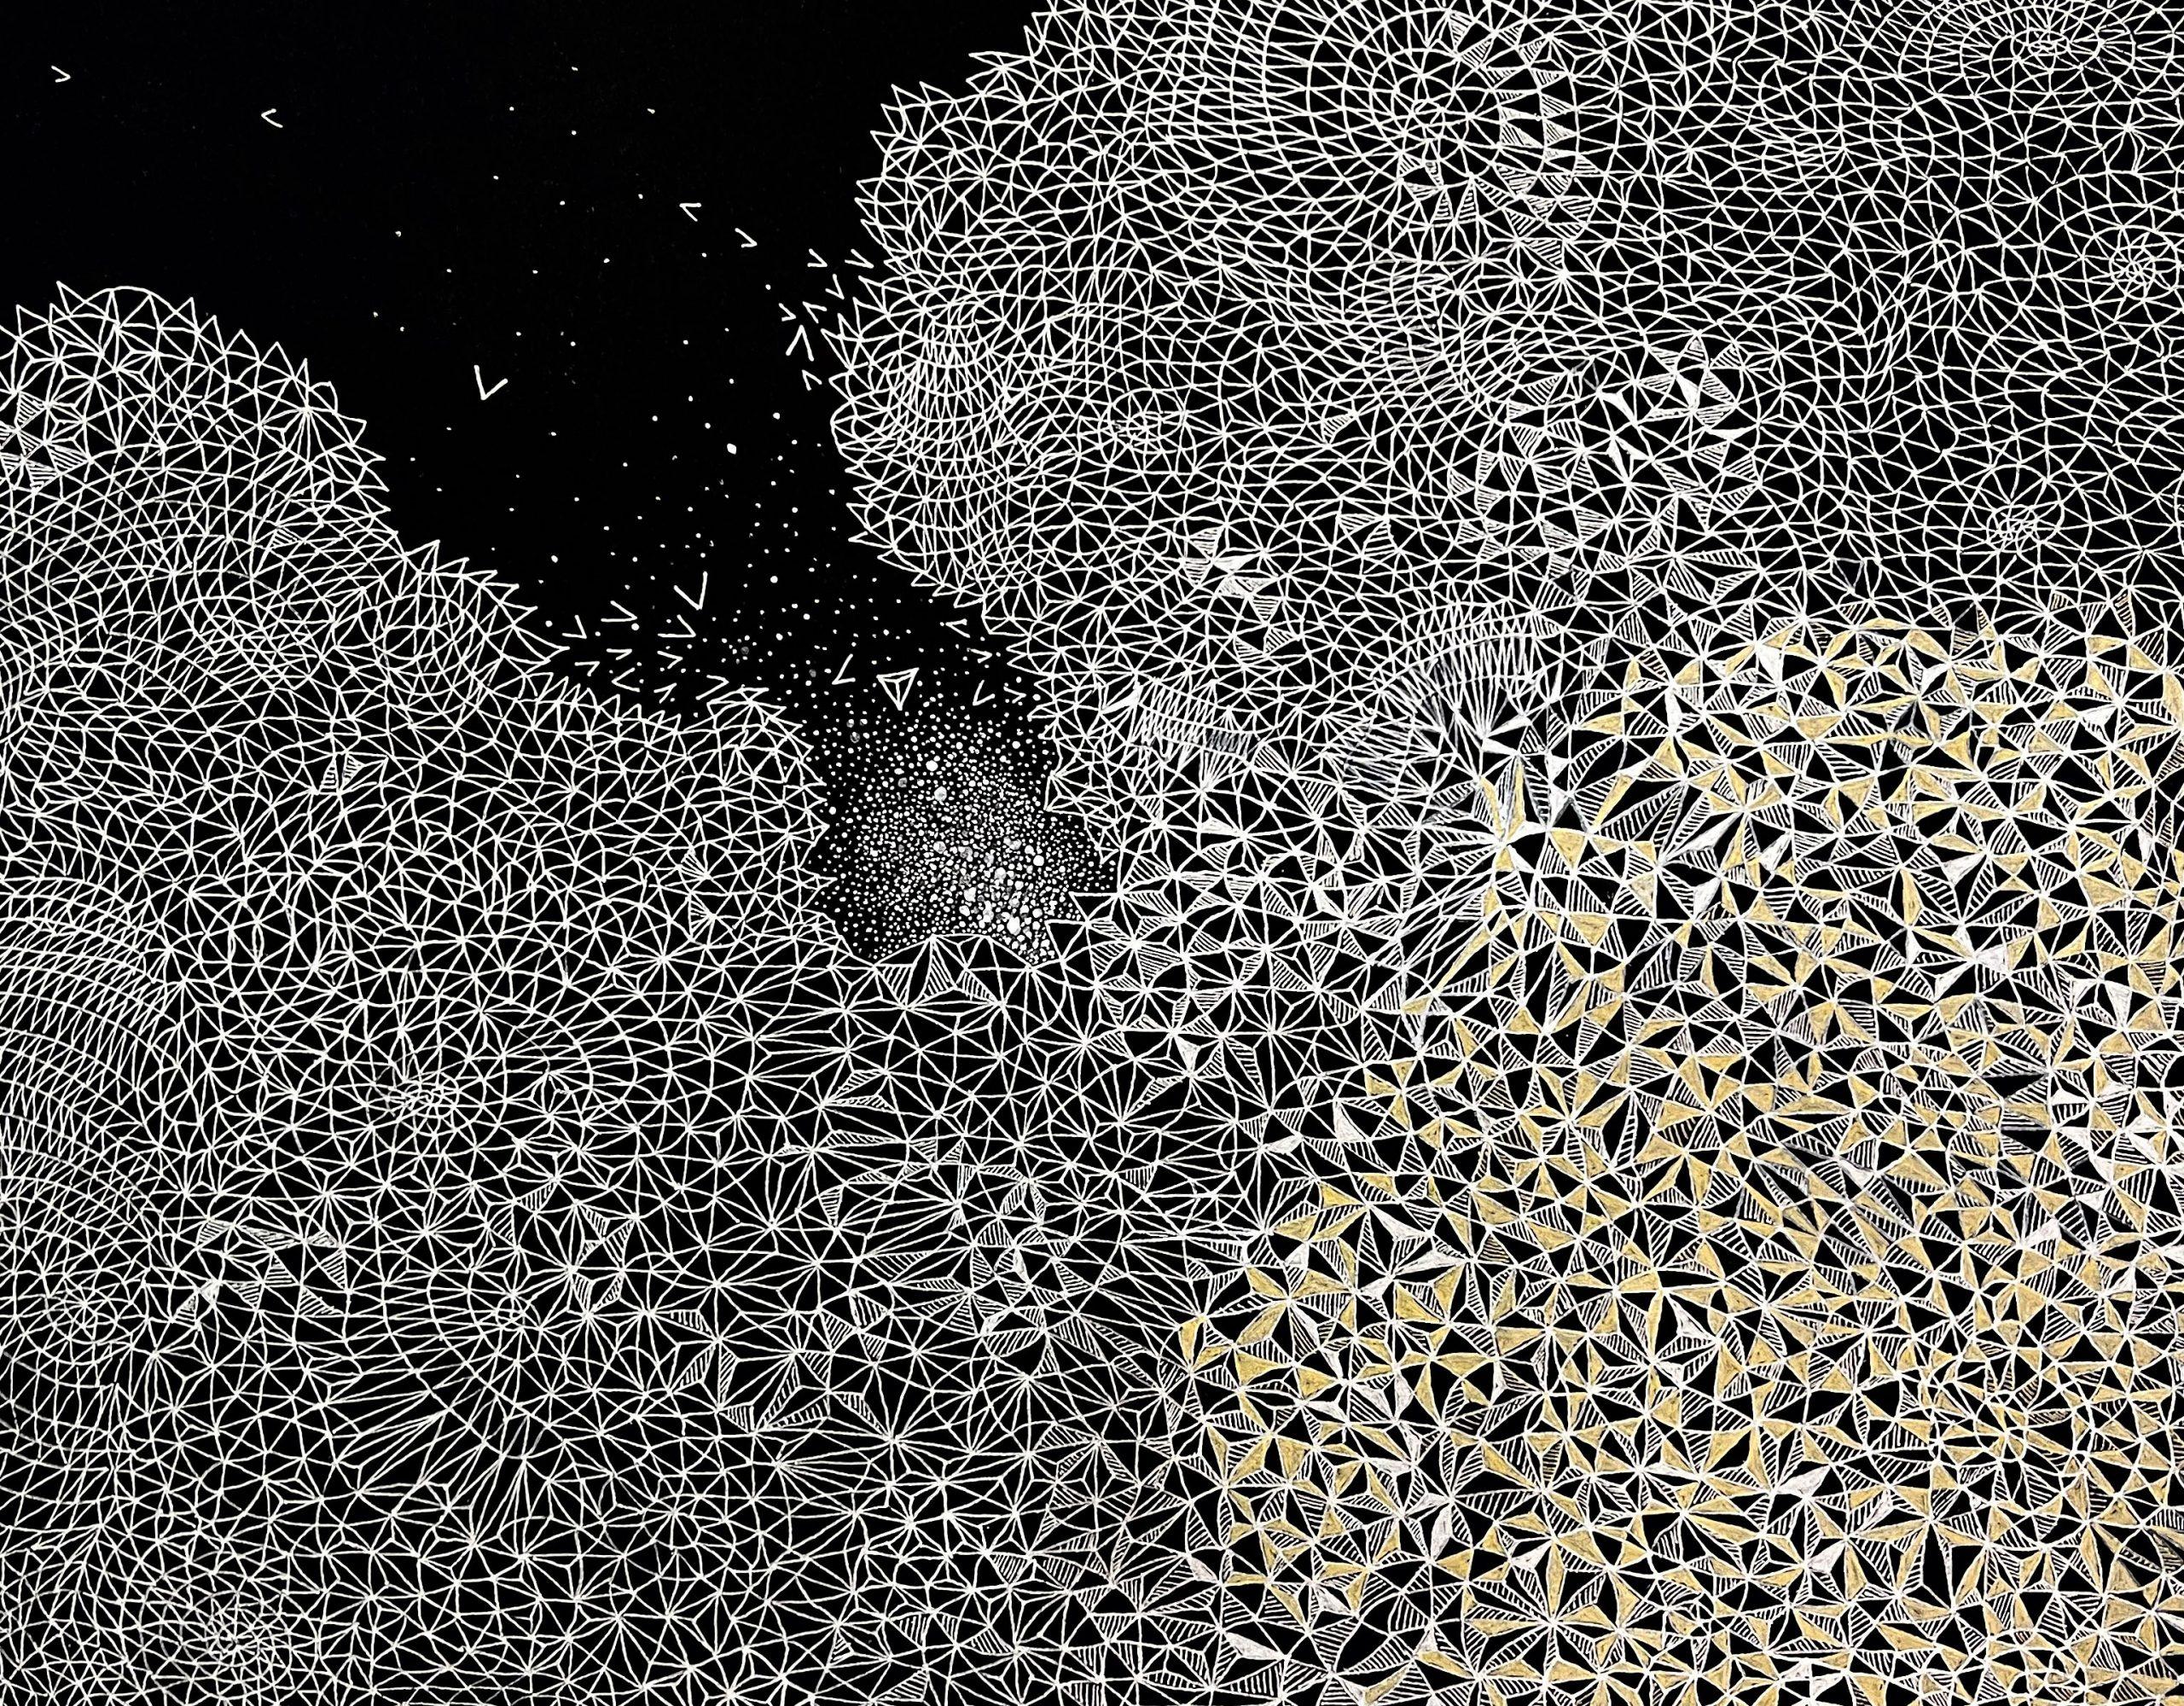 Curra Rueda Abstract Drawing - The frontier of the eternal, paper, gold, black and white, constellations, lines